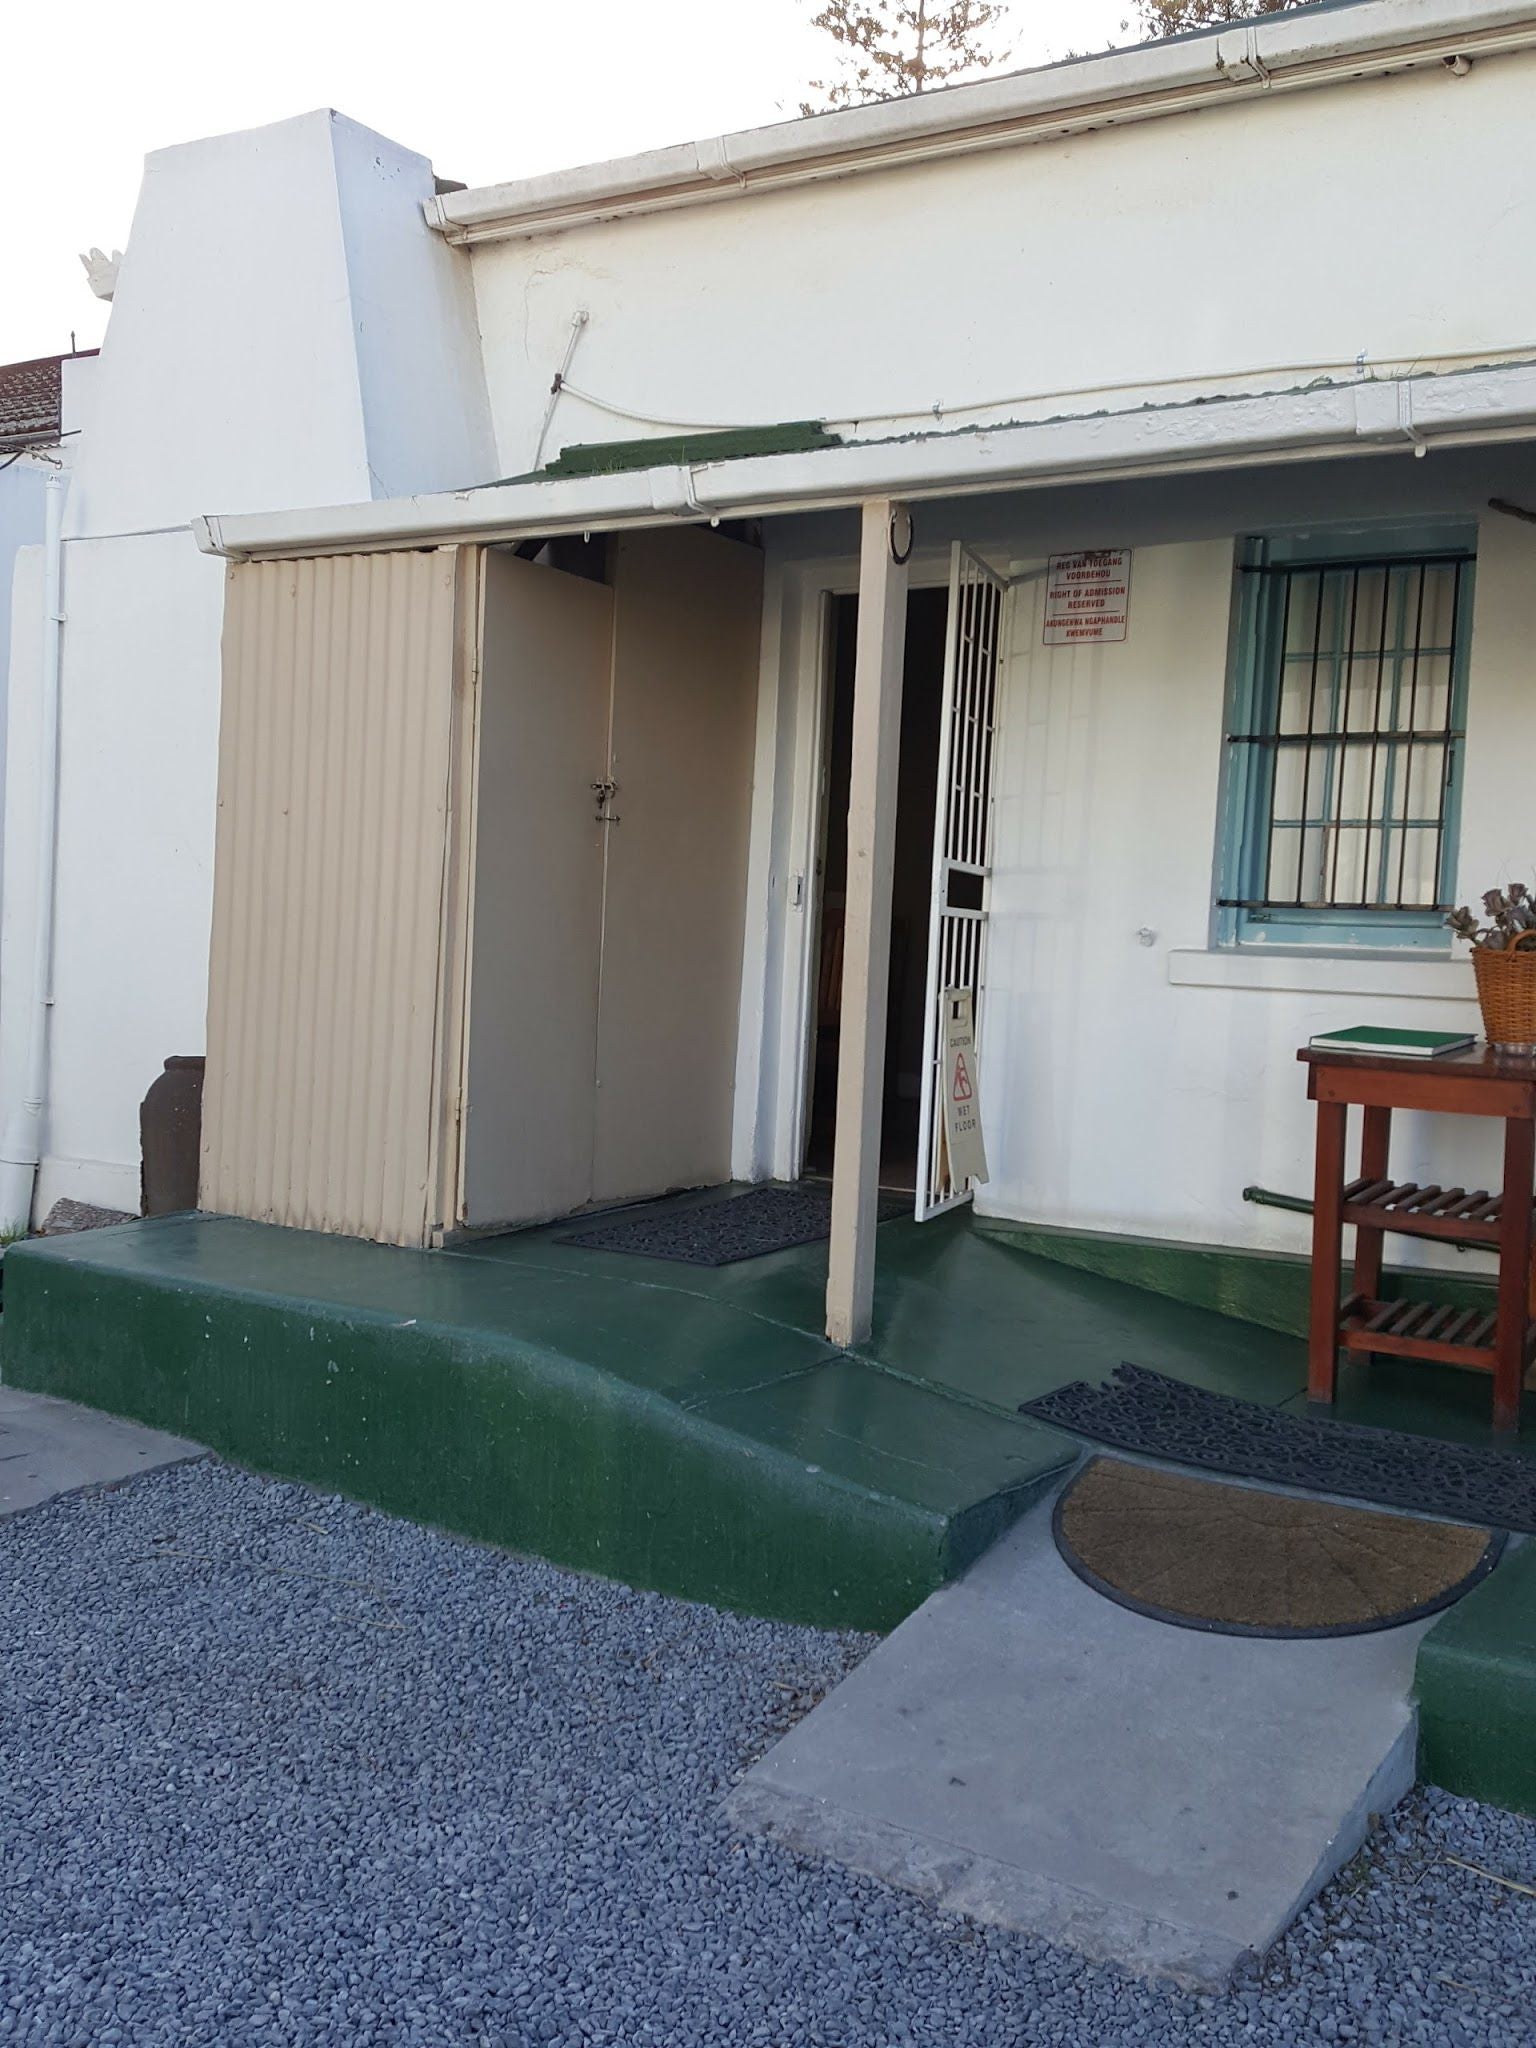 Da Rooms Worcester Western Cape South Africa House, Building, Architecture